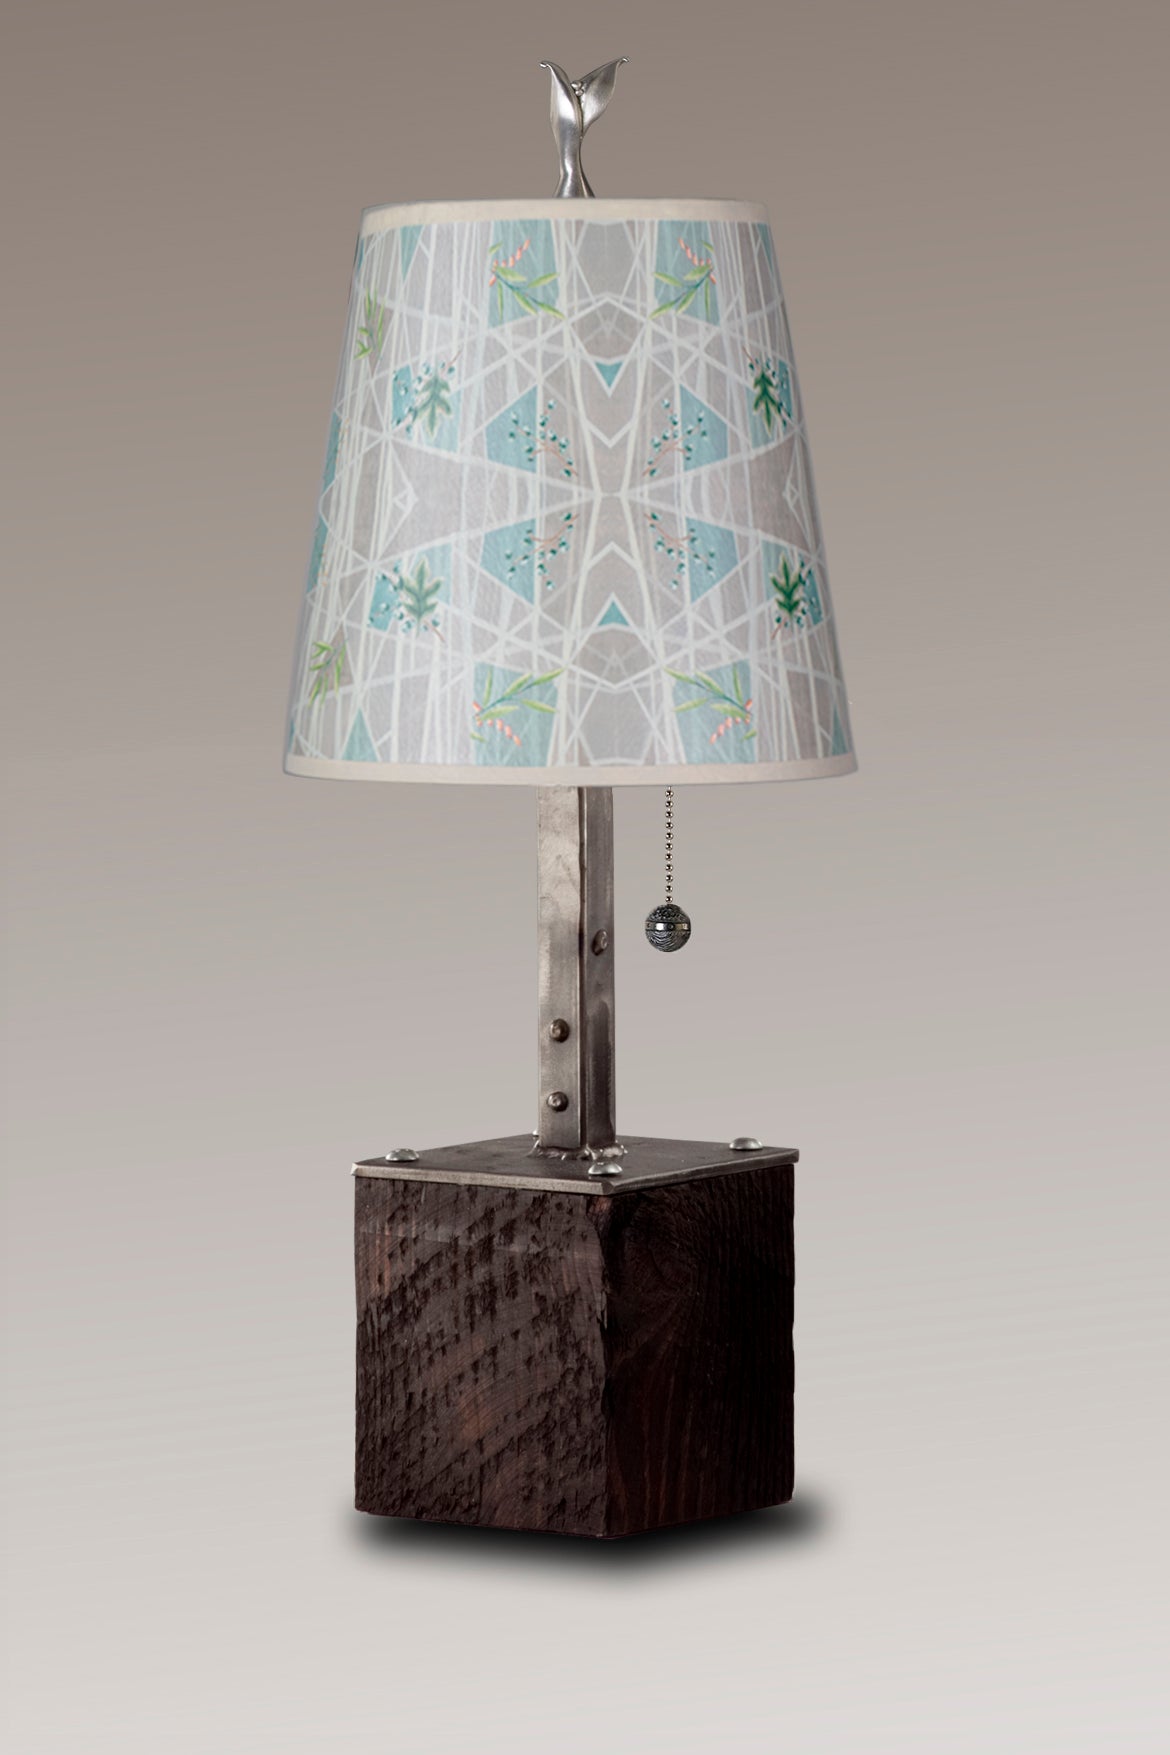 Janna Ugone &amp; Co Table Lamps Steel Table Lamp on Reclaimed Wood with Small Drum Shade in Prism